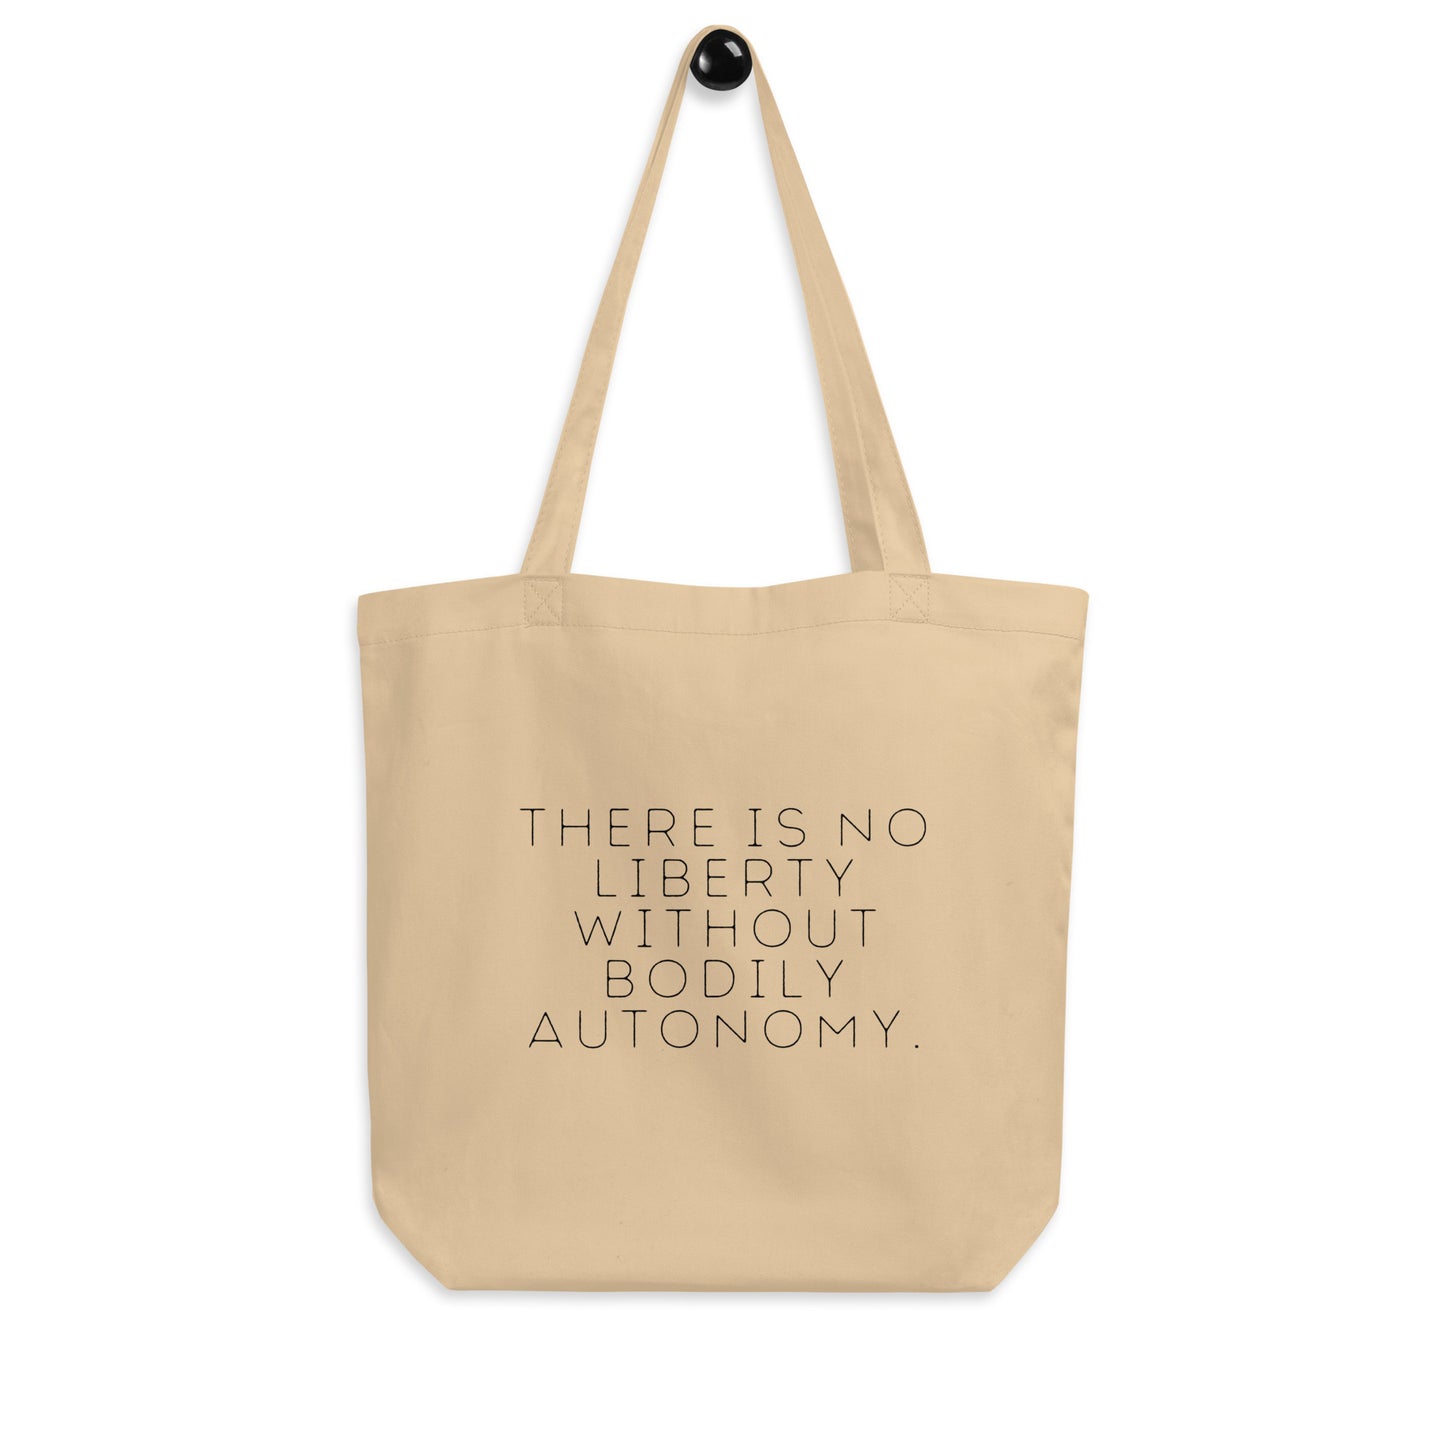 There is no liberty without bodily autonomy Tote